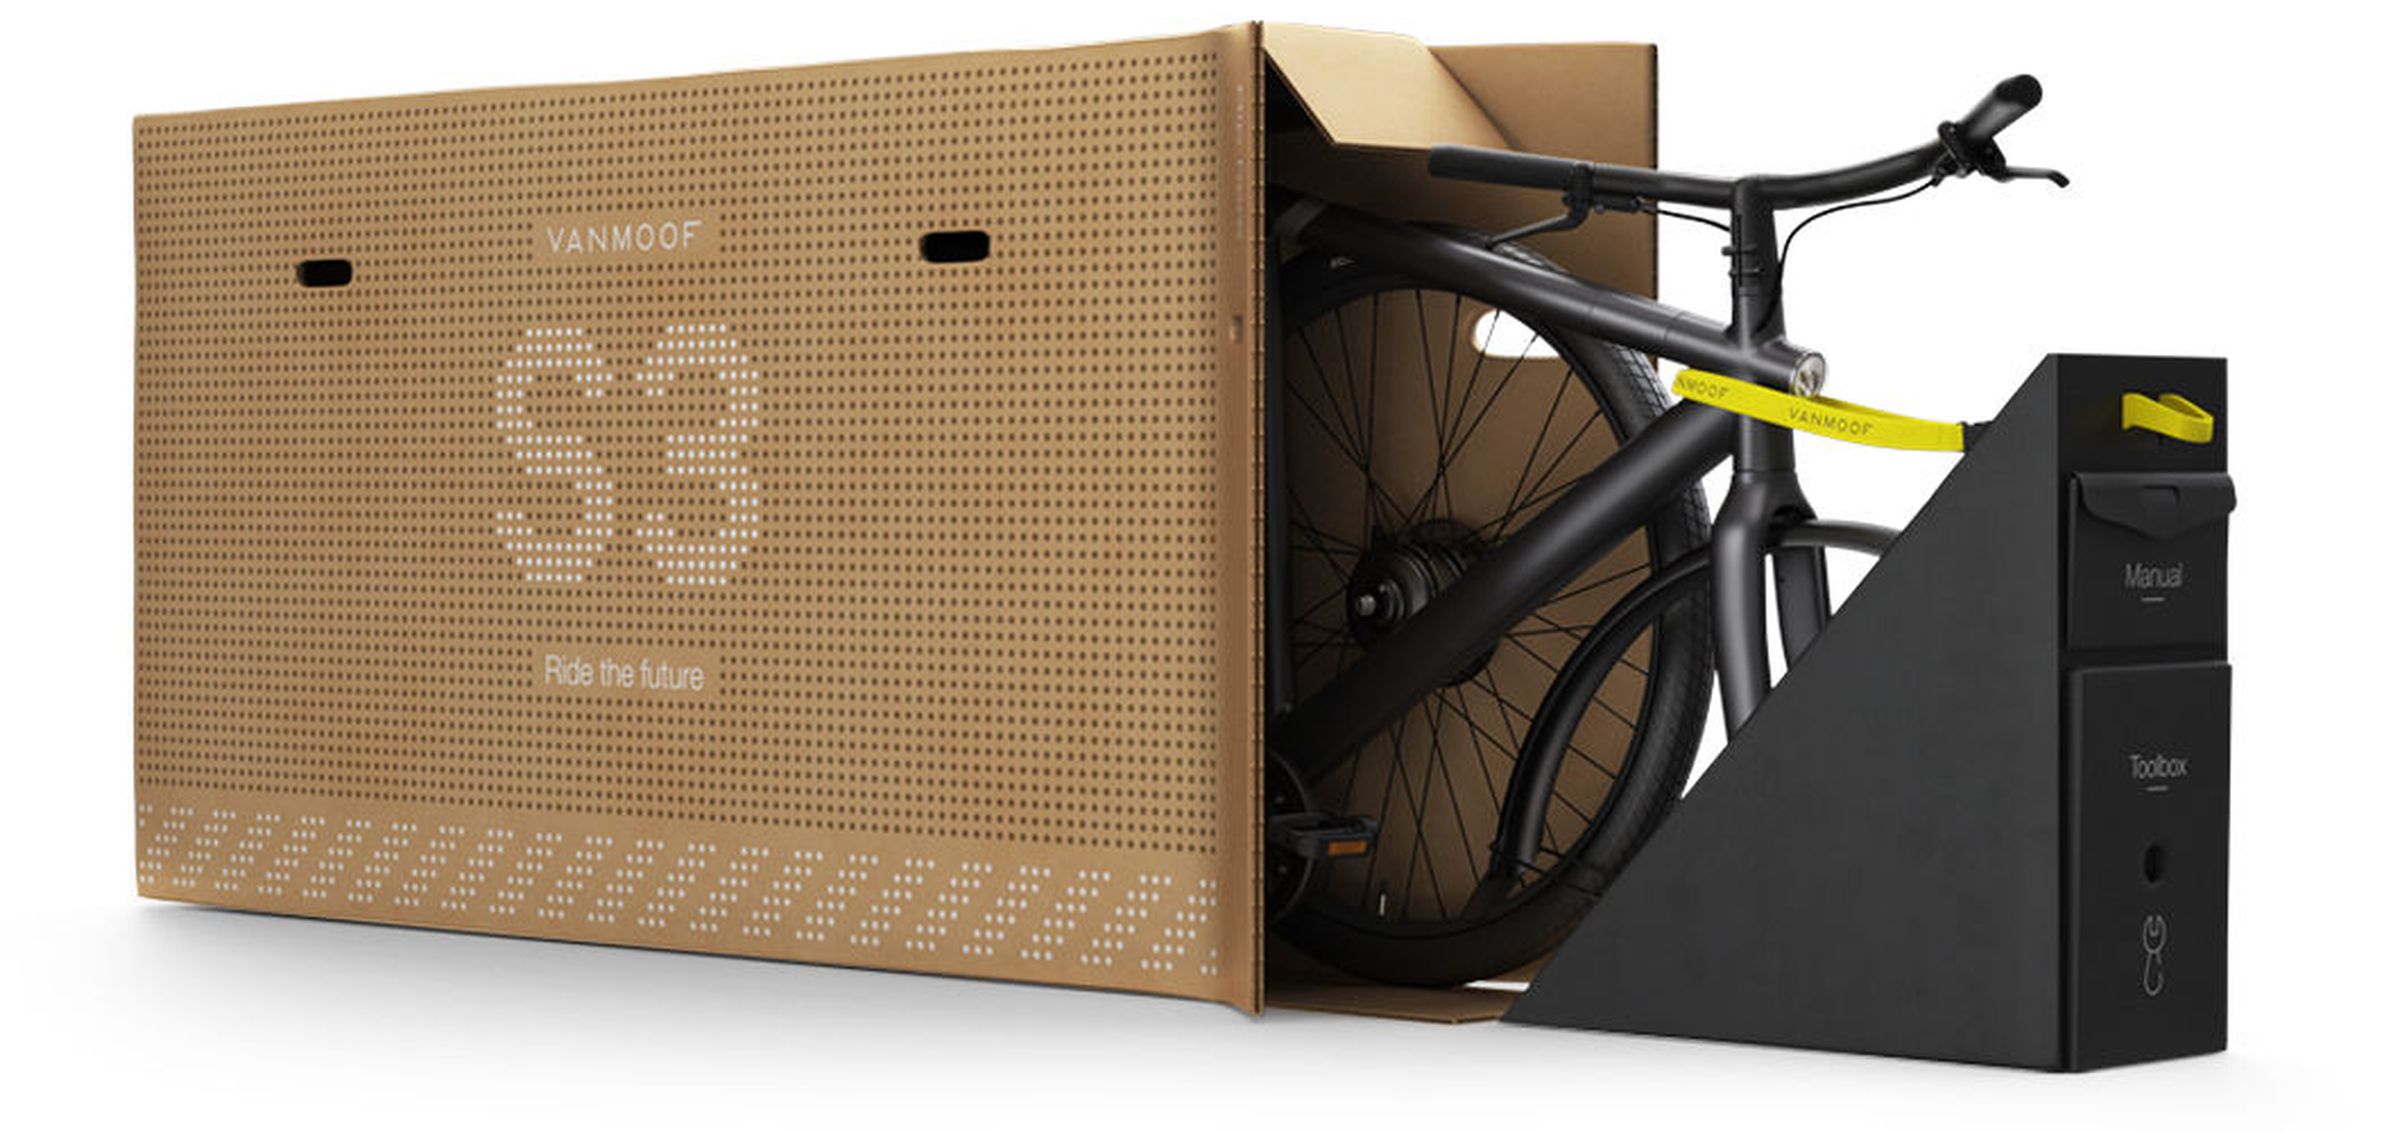 VanMoof’s more eco-friendly boxes are cheaper to ship, but offer less protection than the old TV boxes.